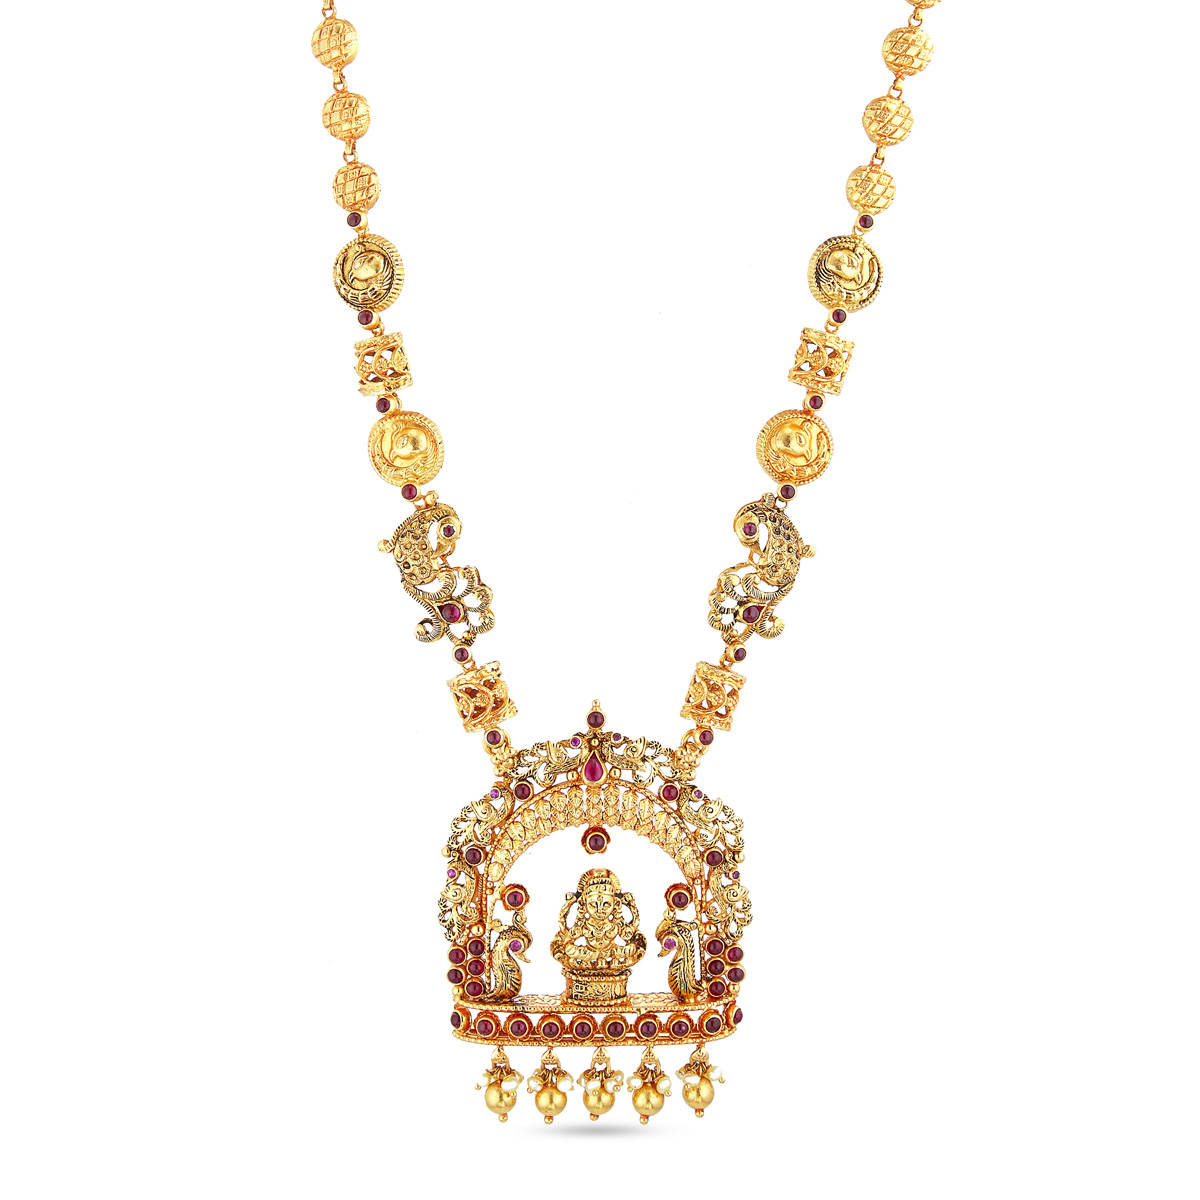 Royal Necklace!